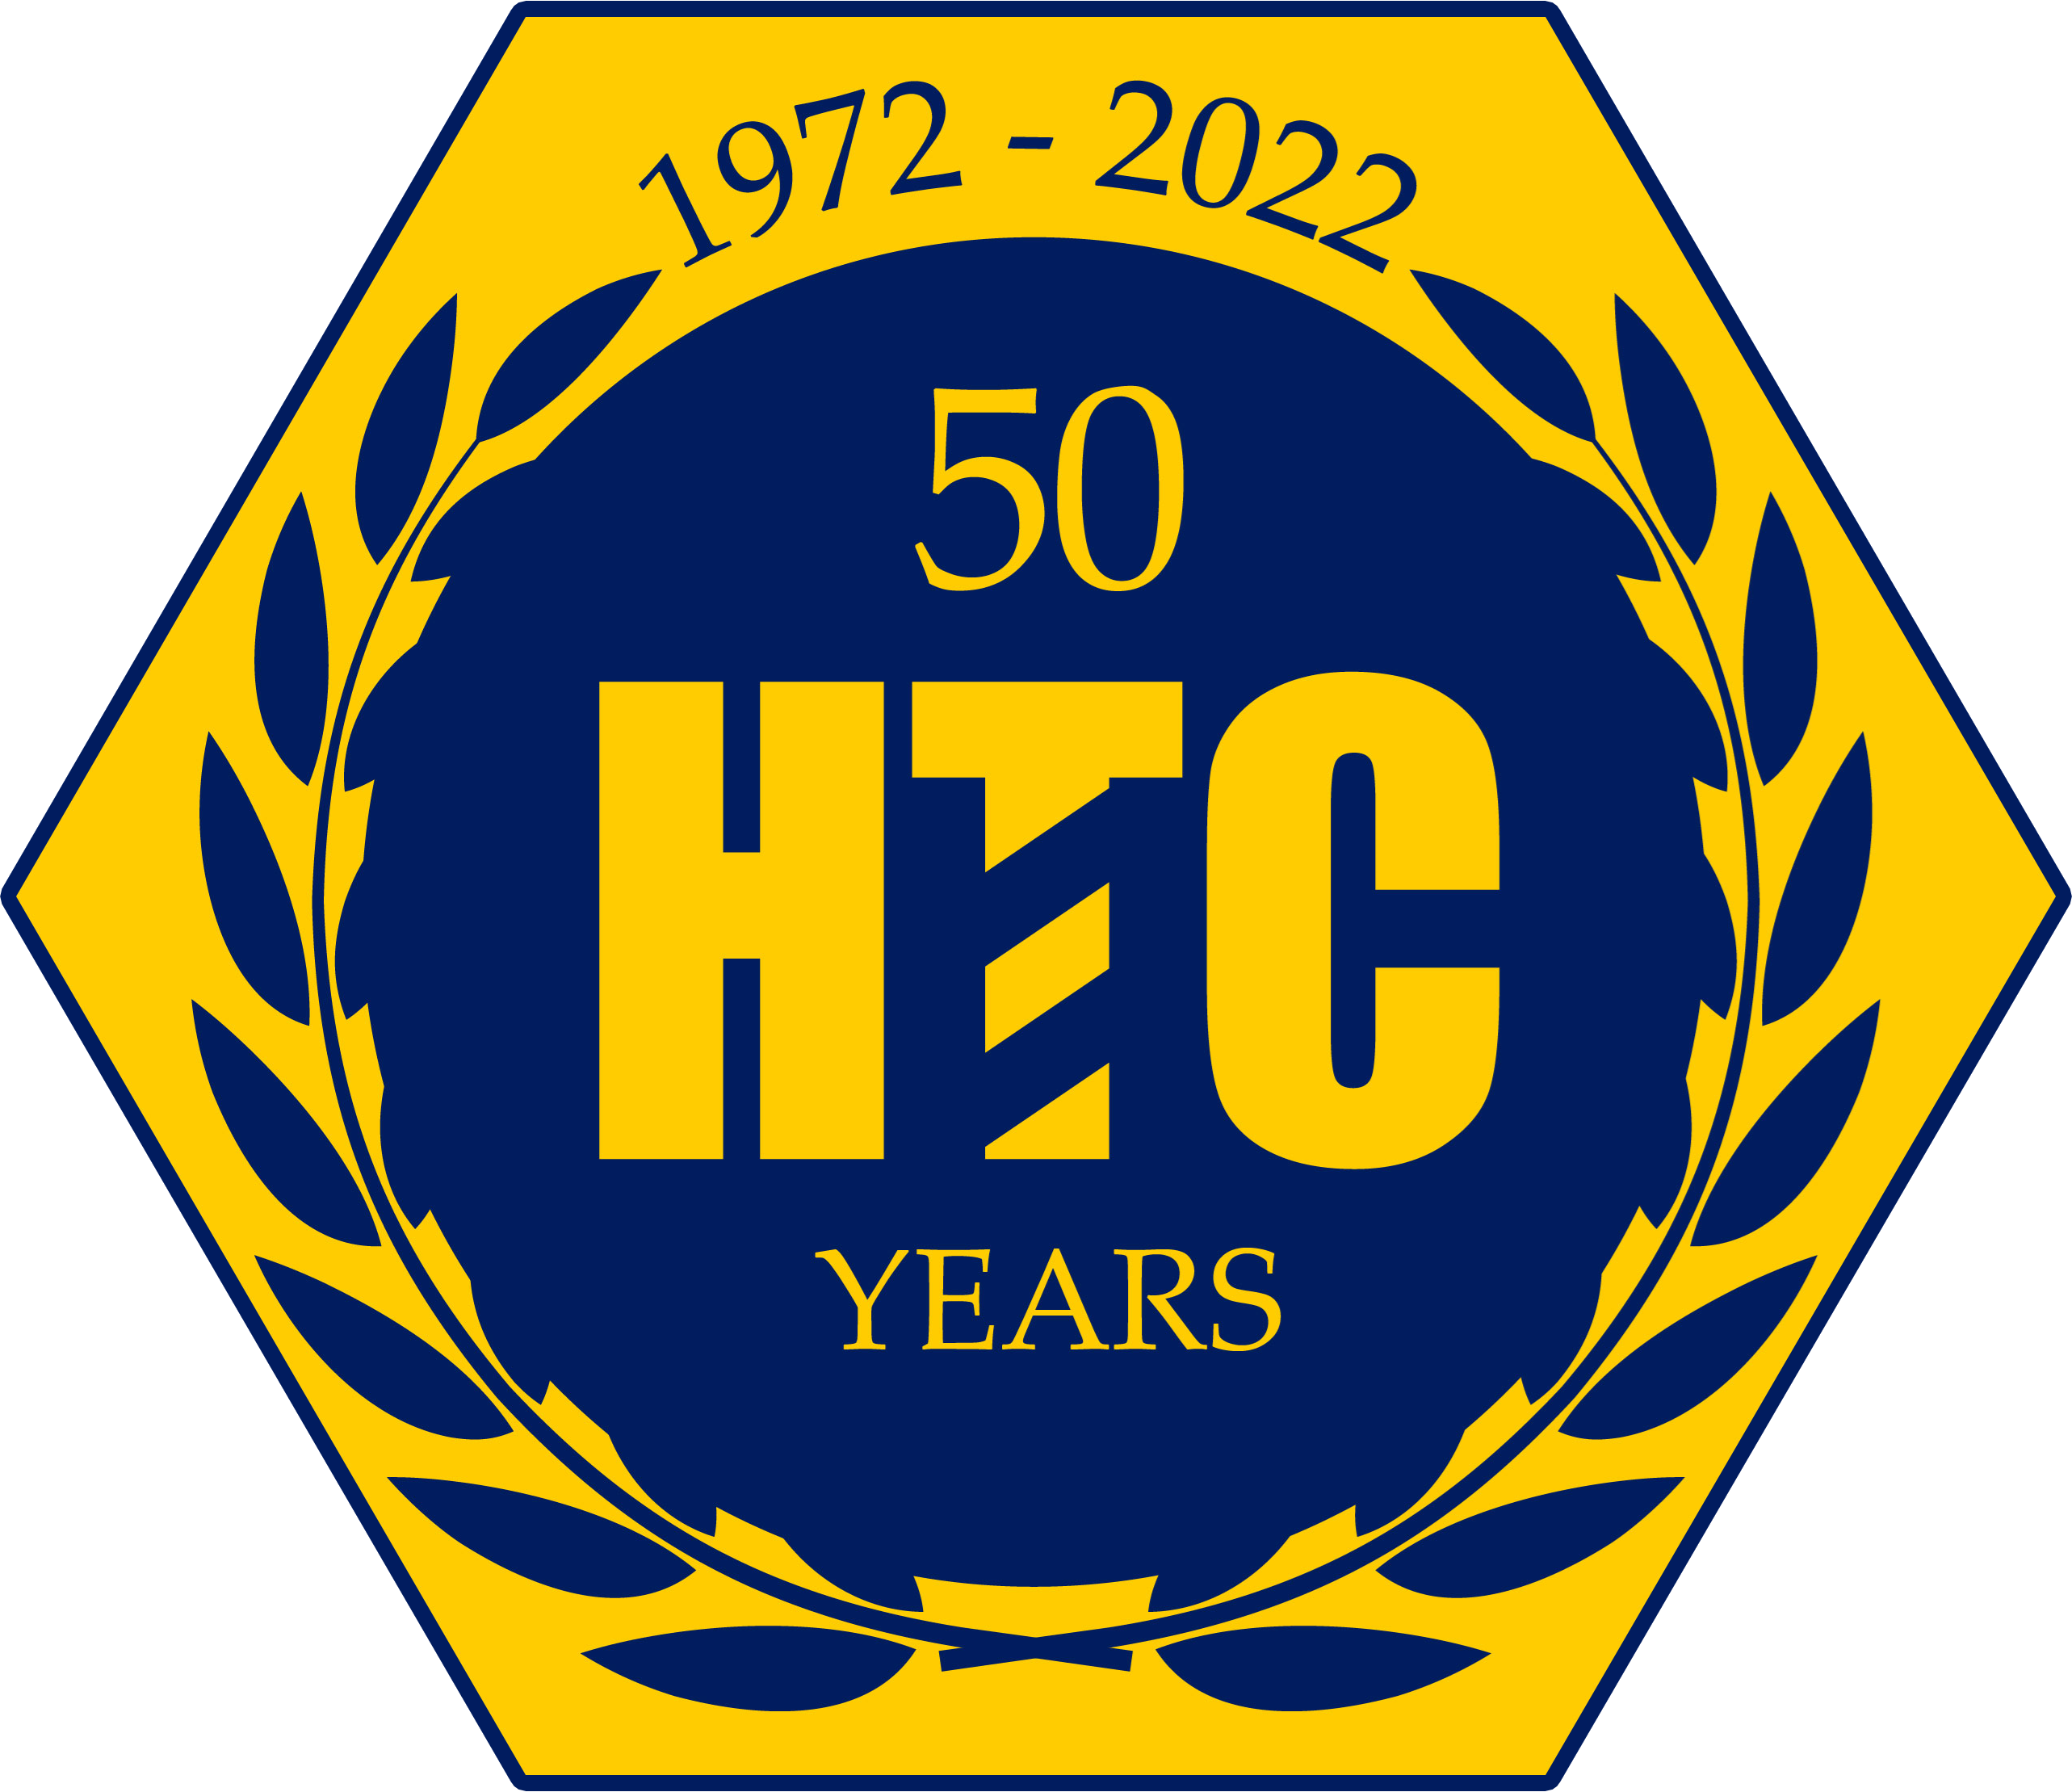 Herts Tool Co. Established Over 50 Years